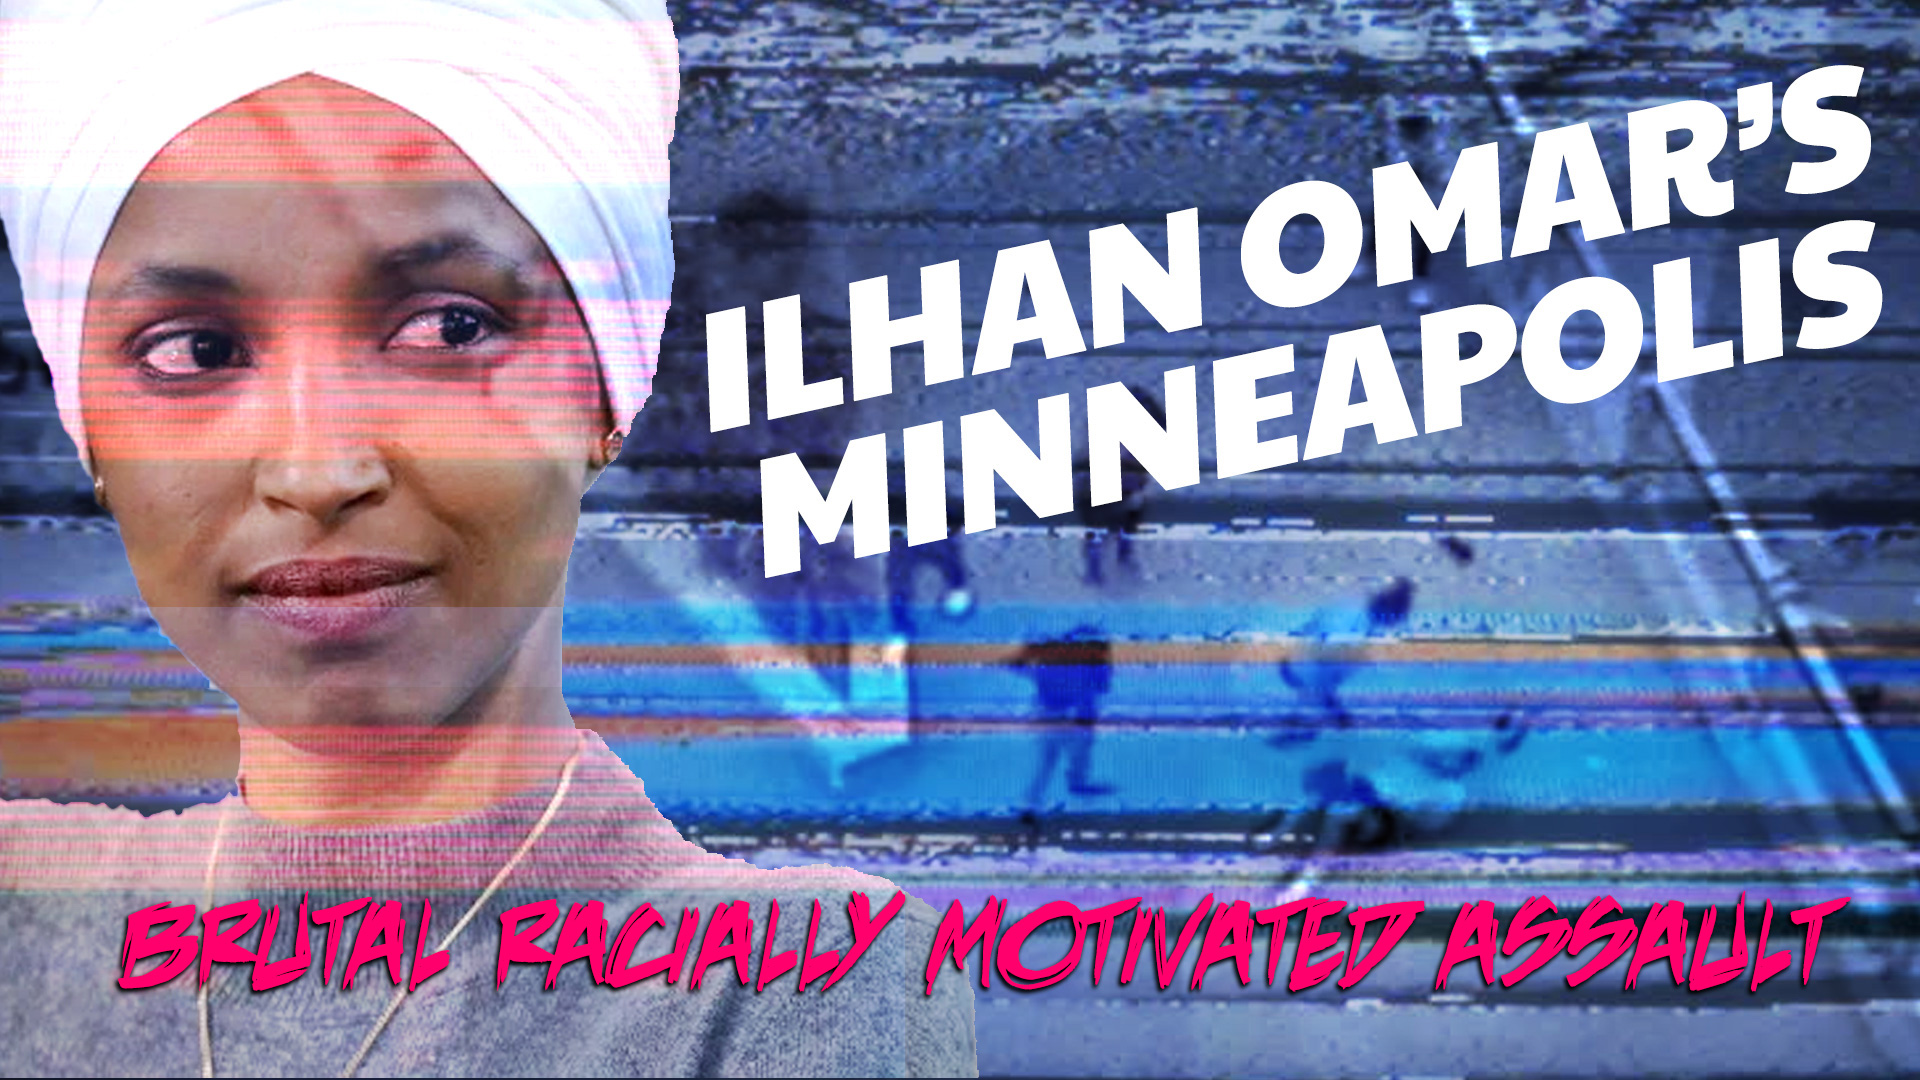 motivated ilhan attack racially minneapolis omar